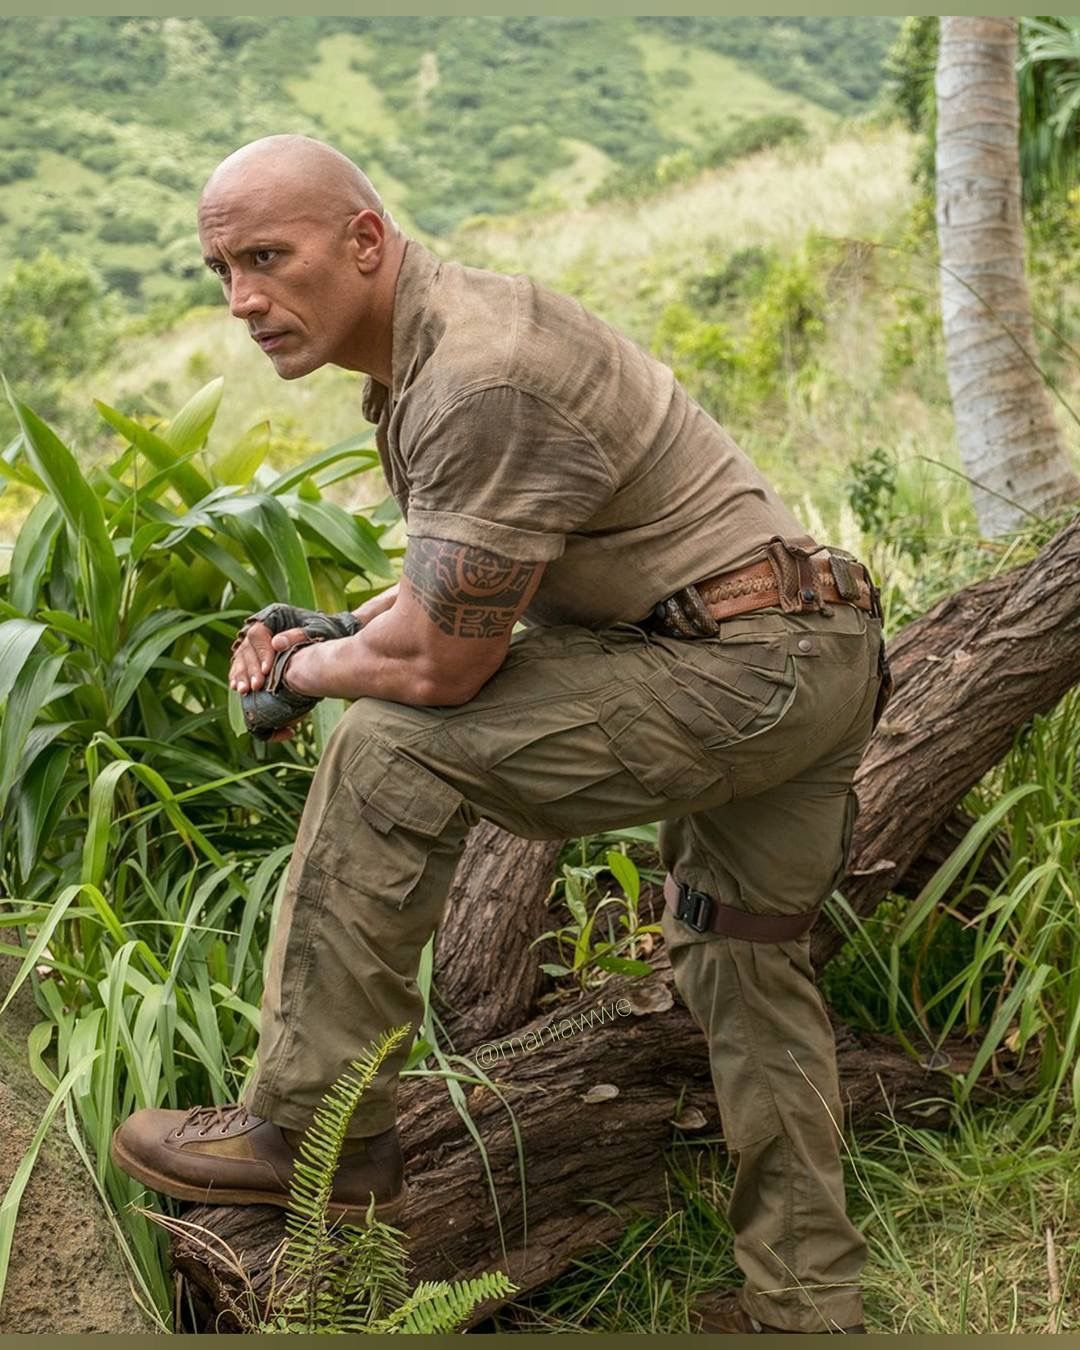 Surprising the world, Dwayne "The Rock" Johnson challenged himself to survive a whole week in the Amazon jungle - T-News